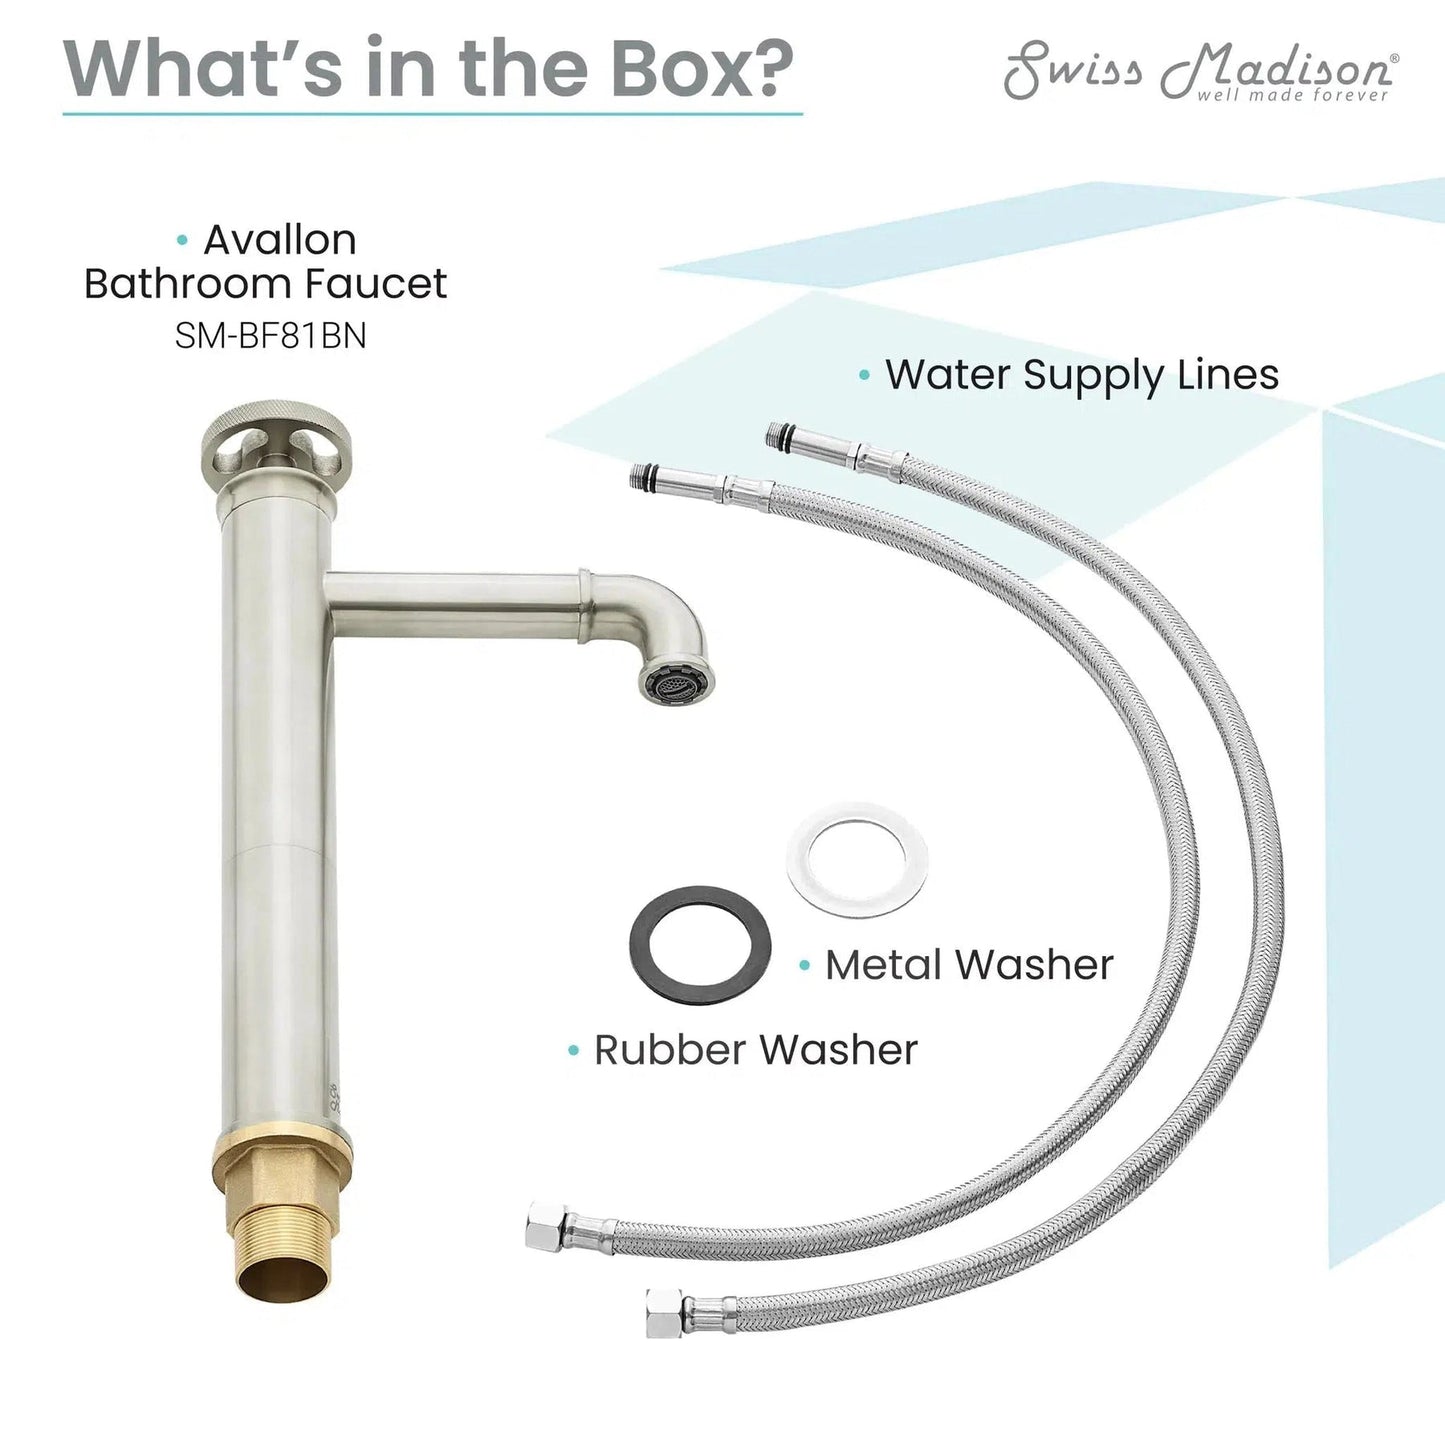 Swiss Madison Avallon 12" Single-Handle Brushed Nickel Bathroom Faucet With 1.2 GPM Flow Rate